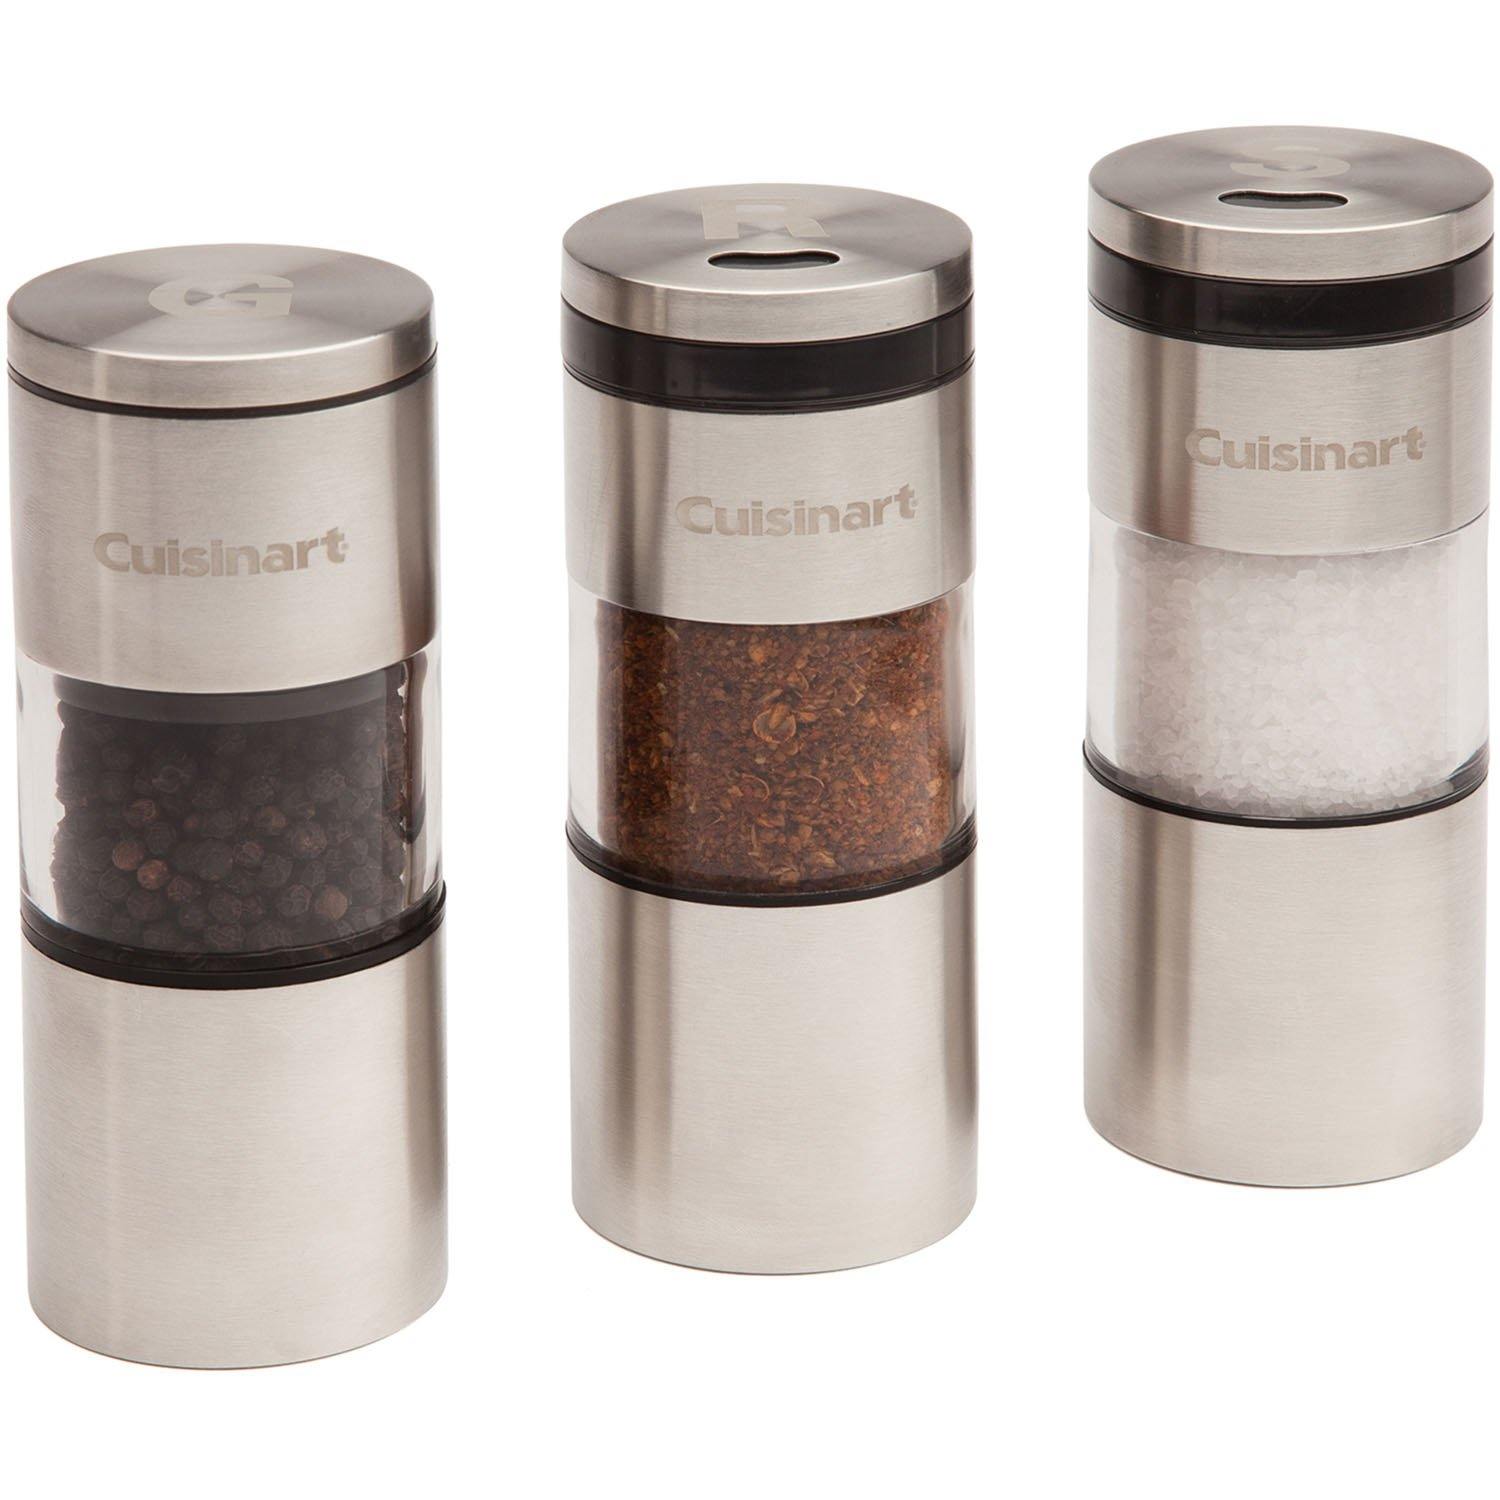 Cuisinart Cuisinart 3-Piece Magnetic Grilling Spice Container Set